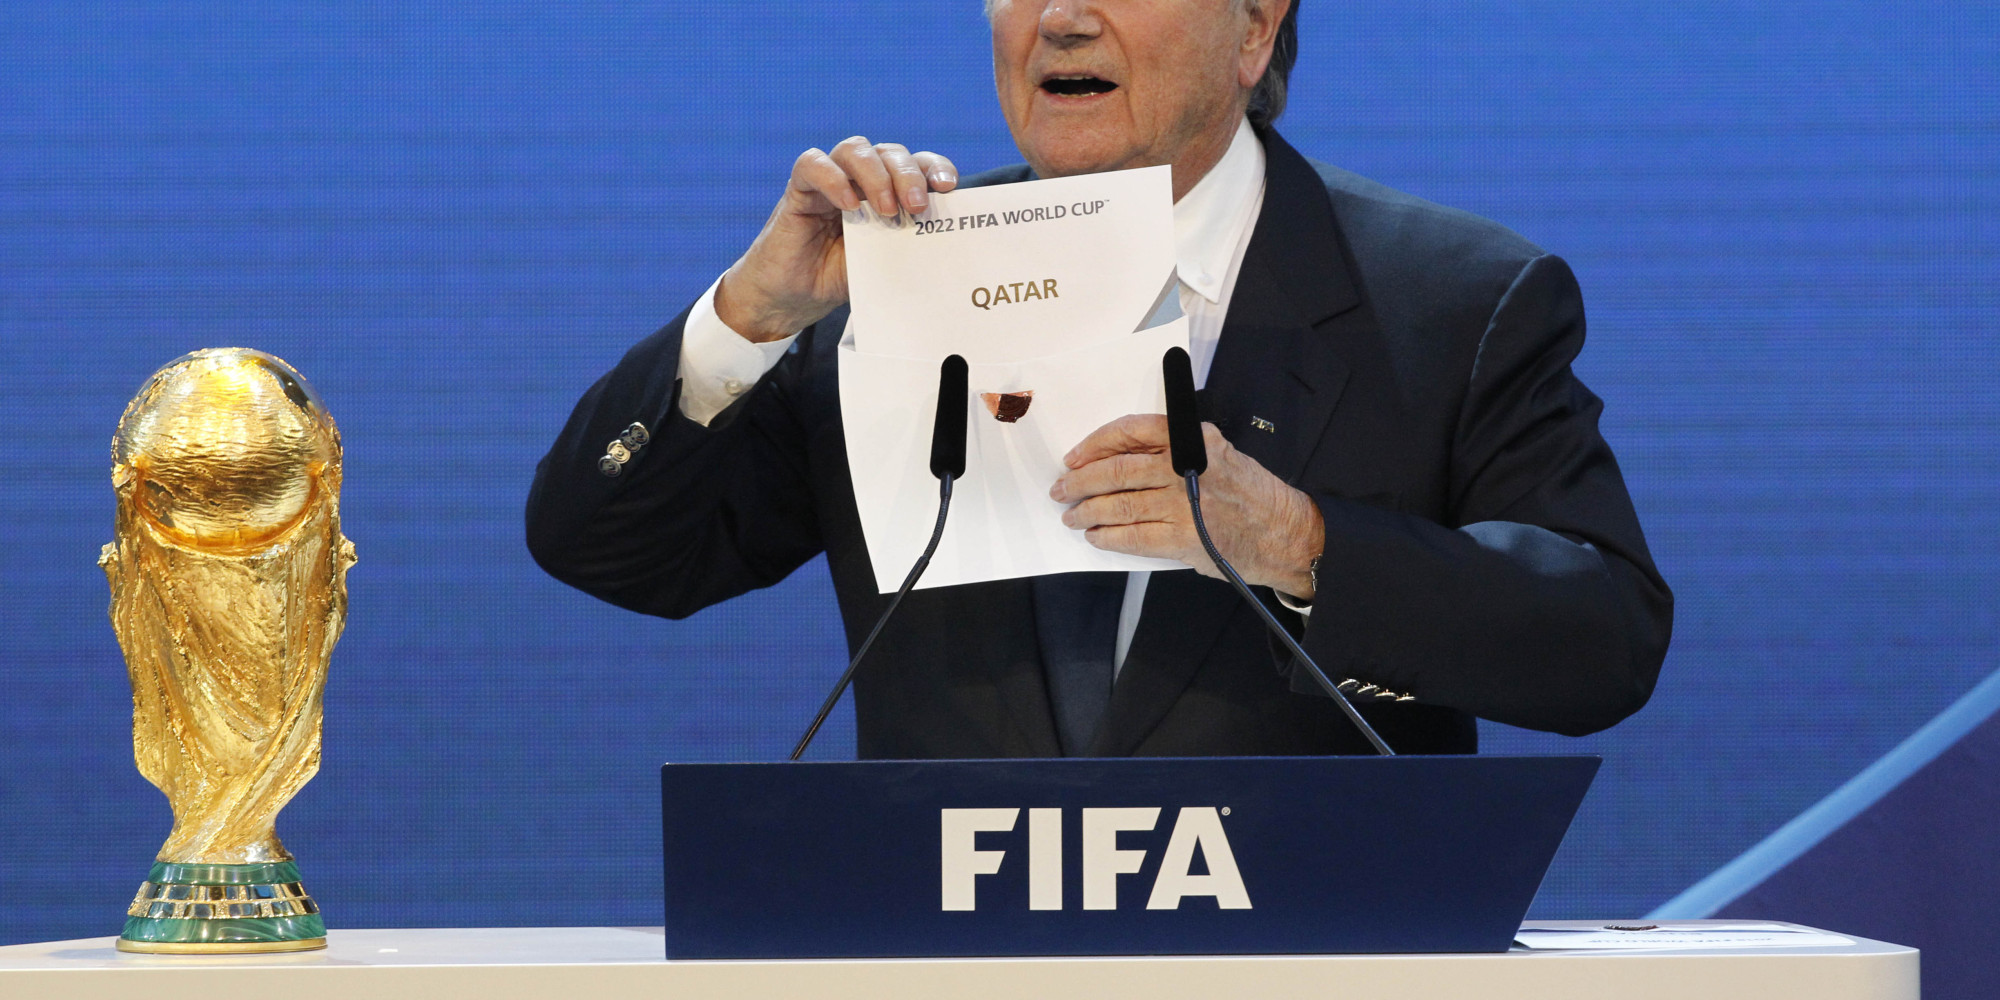 FIFA President Joseph Blatter announces Qatar to host the 2022 World Cup during the announcement of the host country for the 2022 soccer World Cup in Zurich, Switzerland, Thursday, Dec. 2, 2010. (AP Photo/Anja Niedringhaus)